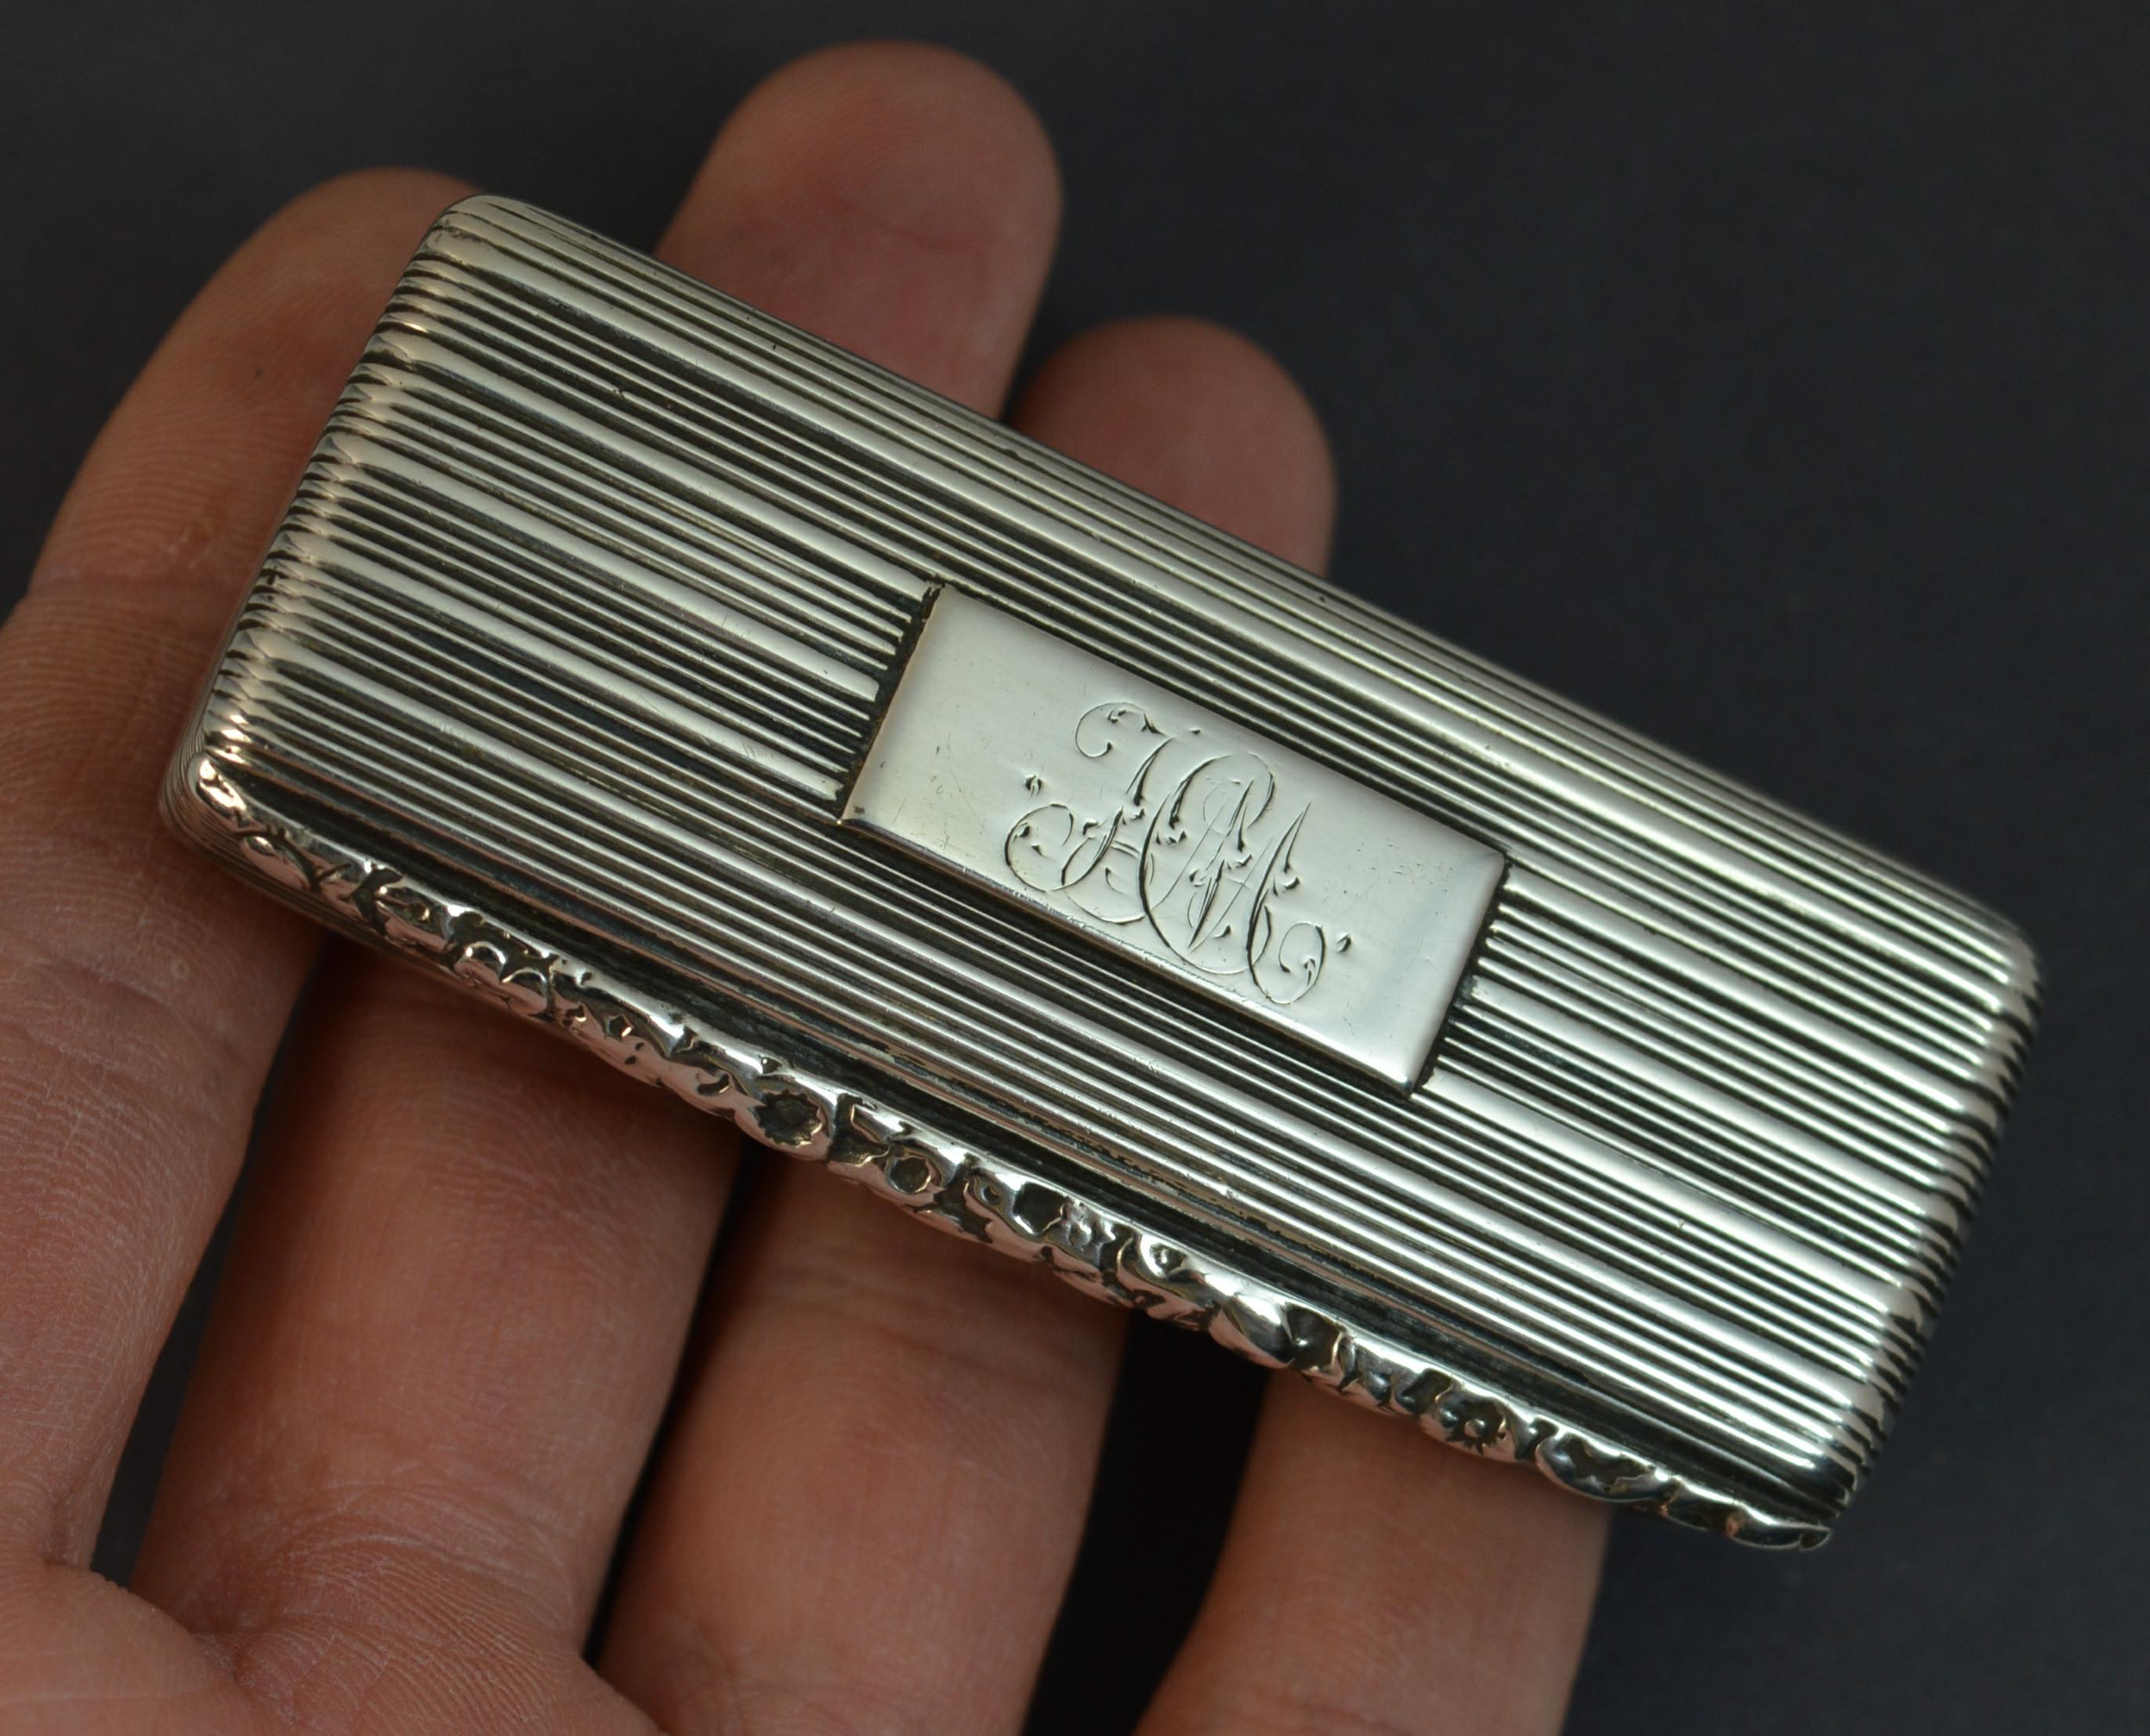 A beautiful solid silver snuff box.
William IV period, English made.
Good gauge, shape and size.
Ridged finish throughout with a floral relief finish to the lid section. Cartouche with HM initials.

Hallmarks ; full hallmarks to inside, Thomas Shaw